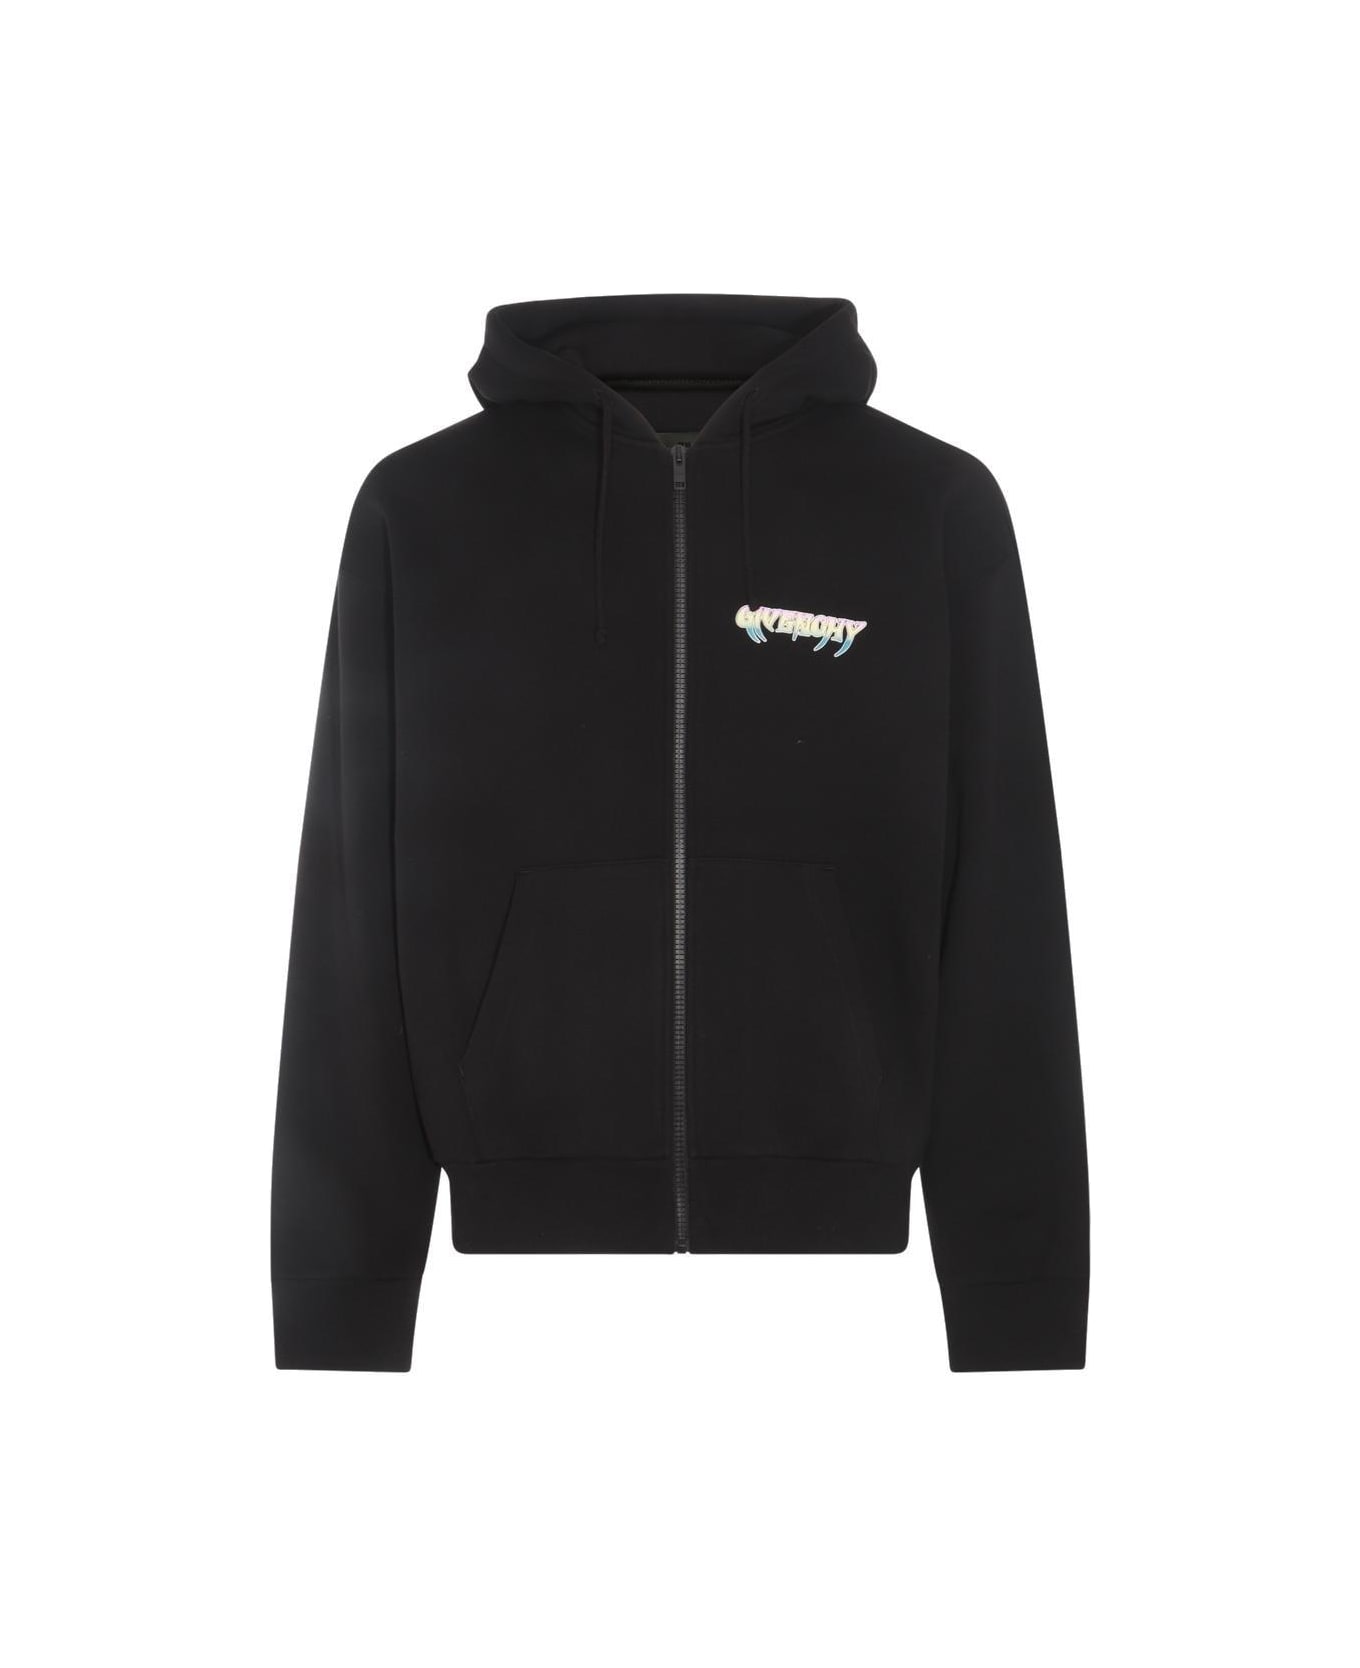 Givenchy Graphic Printed Zipped Hoodie - Black フリース